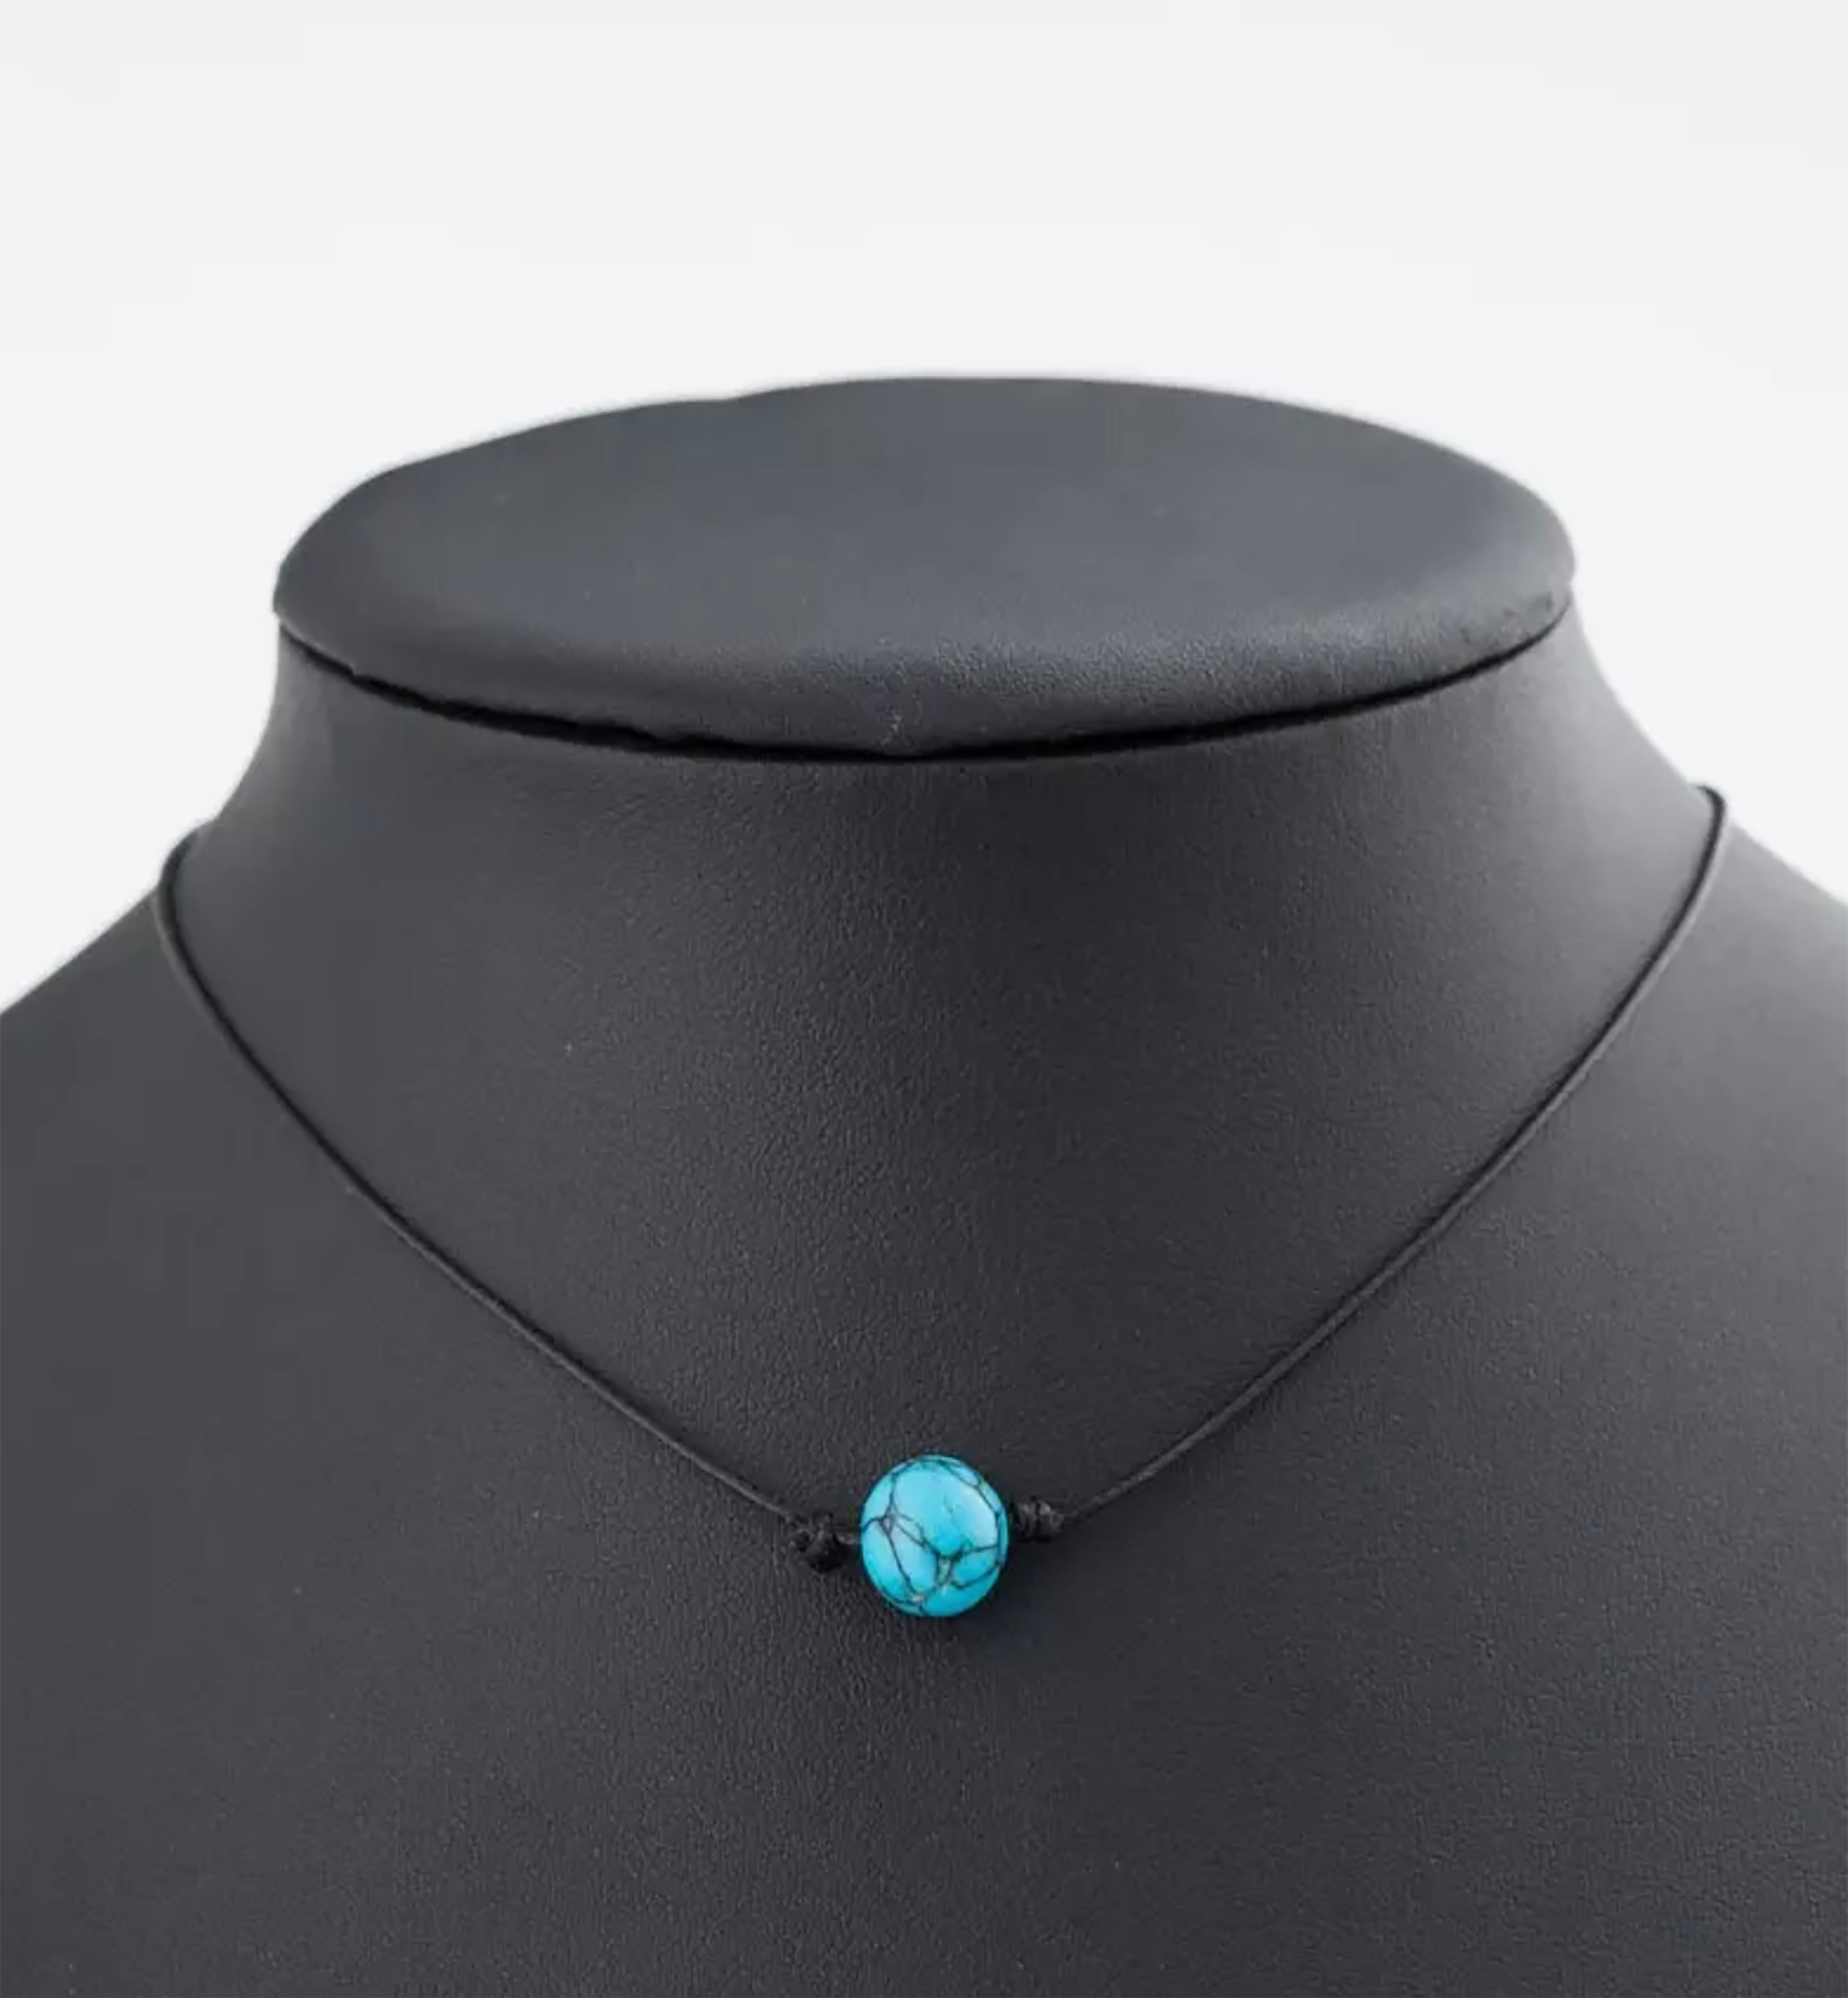 Turquoise Choker Necklace with Leather Cord